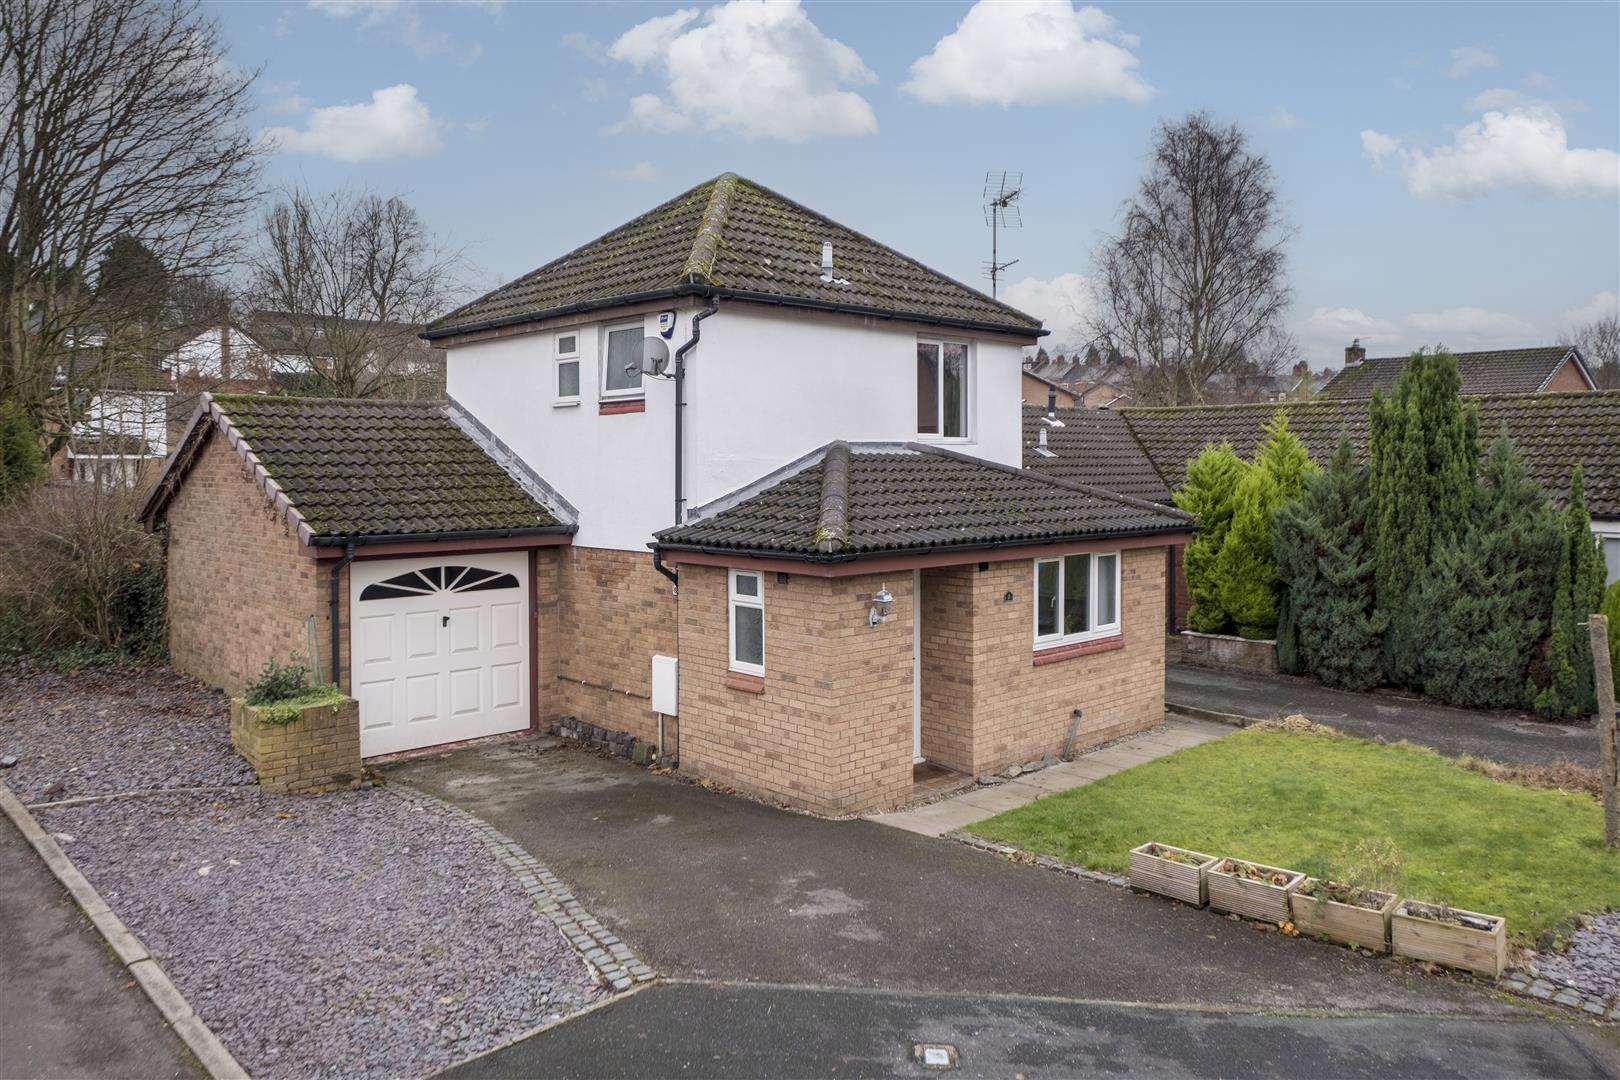 2 bedroom  Detached House for Sale in Northwich